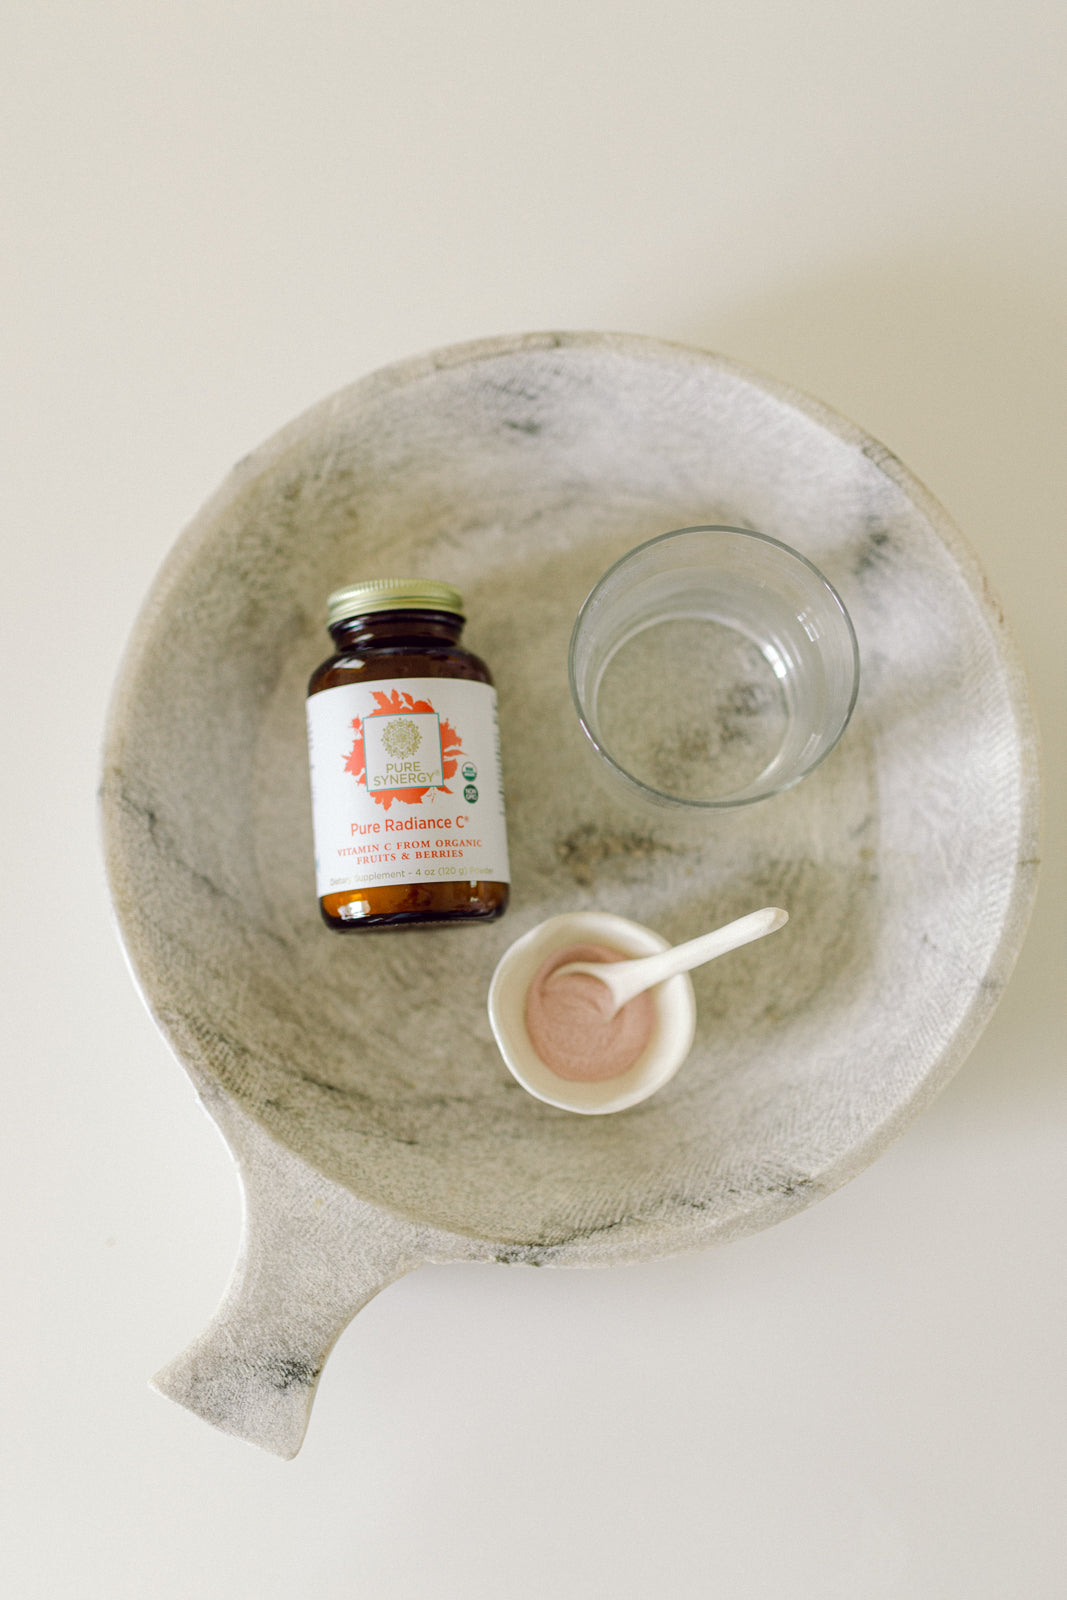 Bottle of Pure Radiance Vitamin C Powder in a bowl